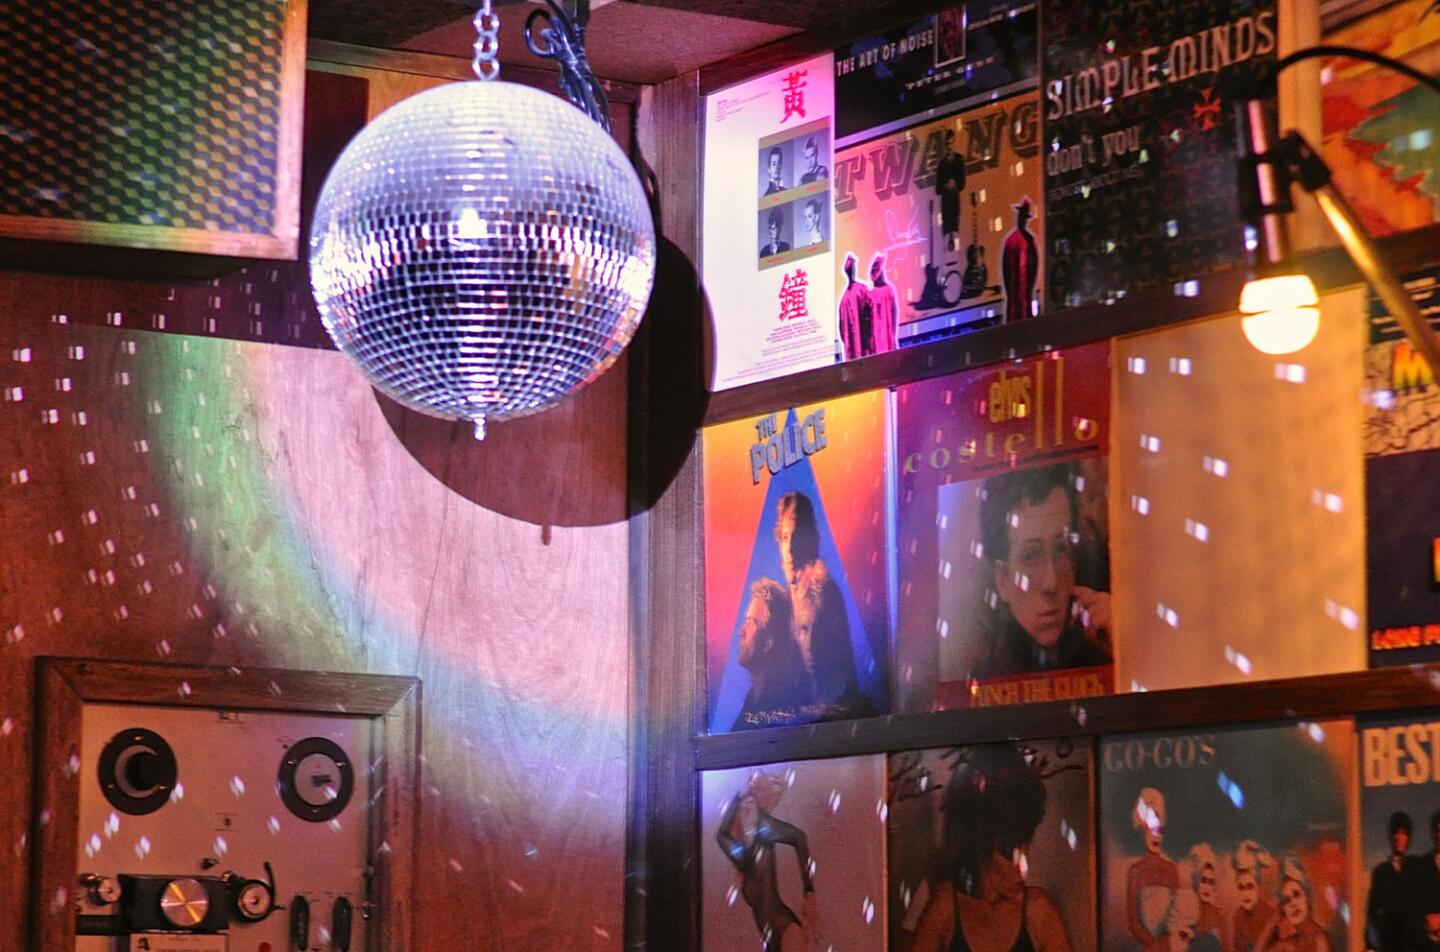 A disco ball in one of the private karaoke rooms.